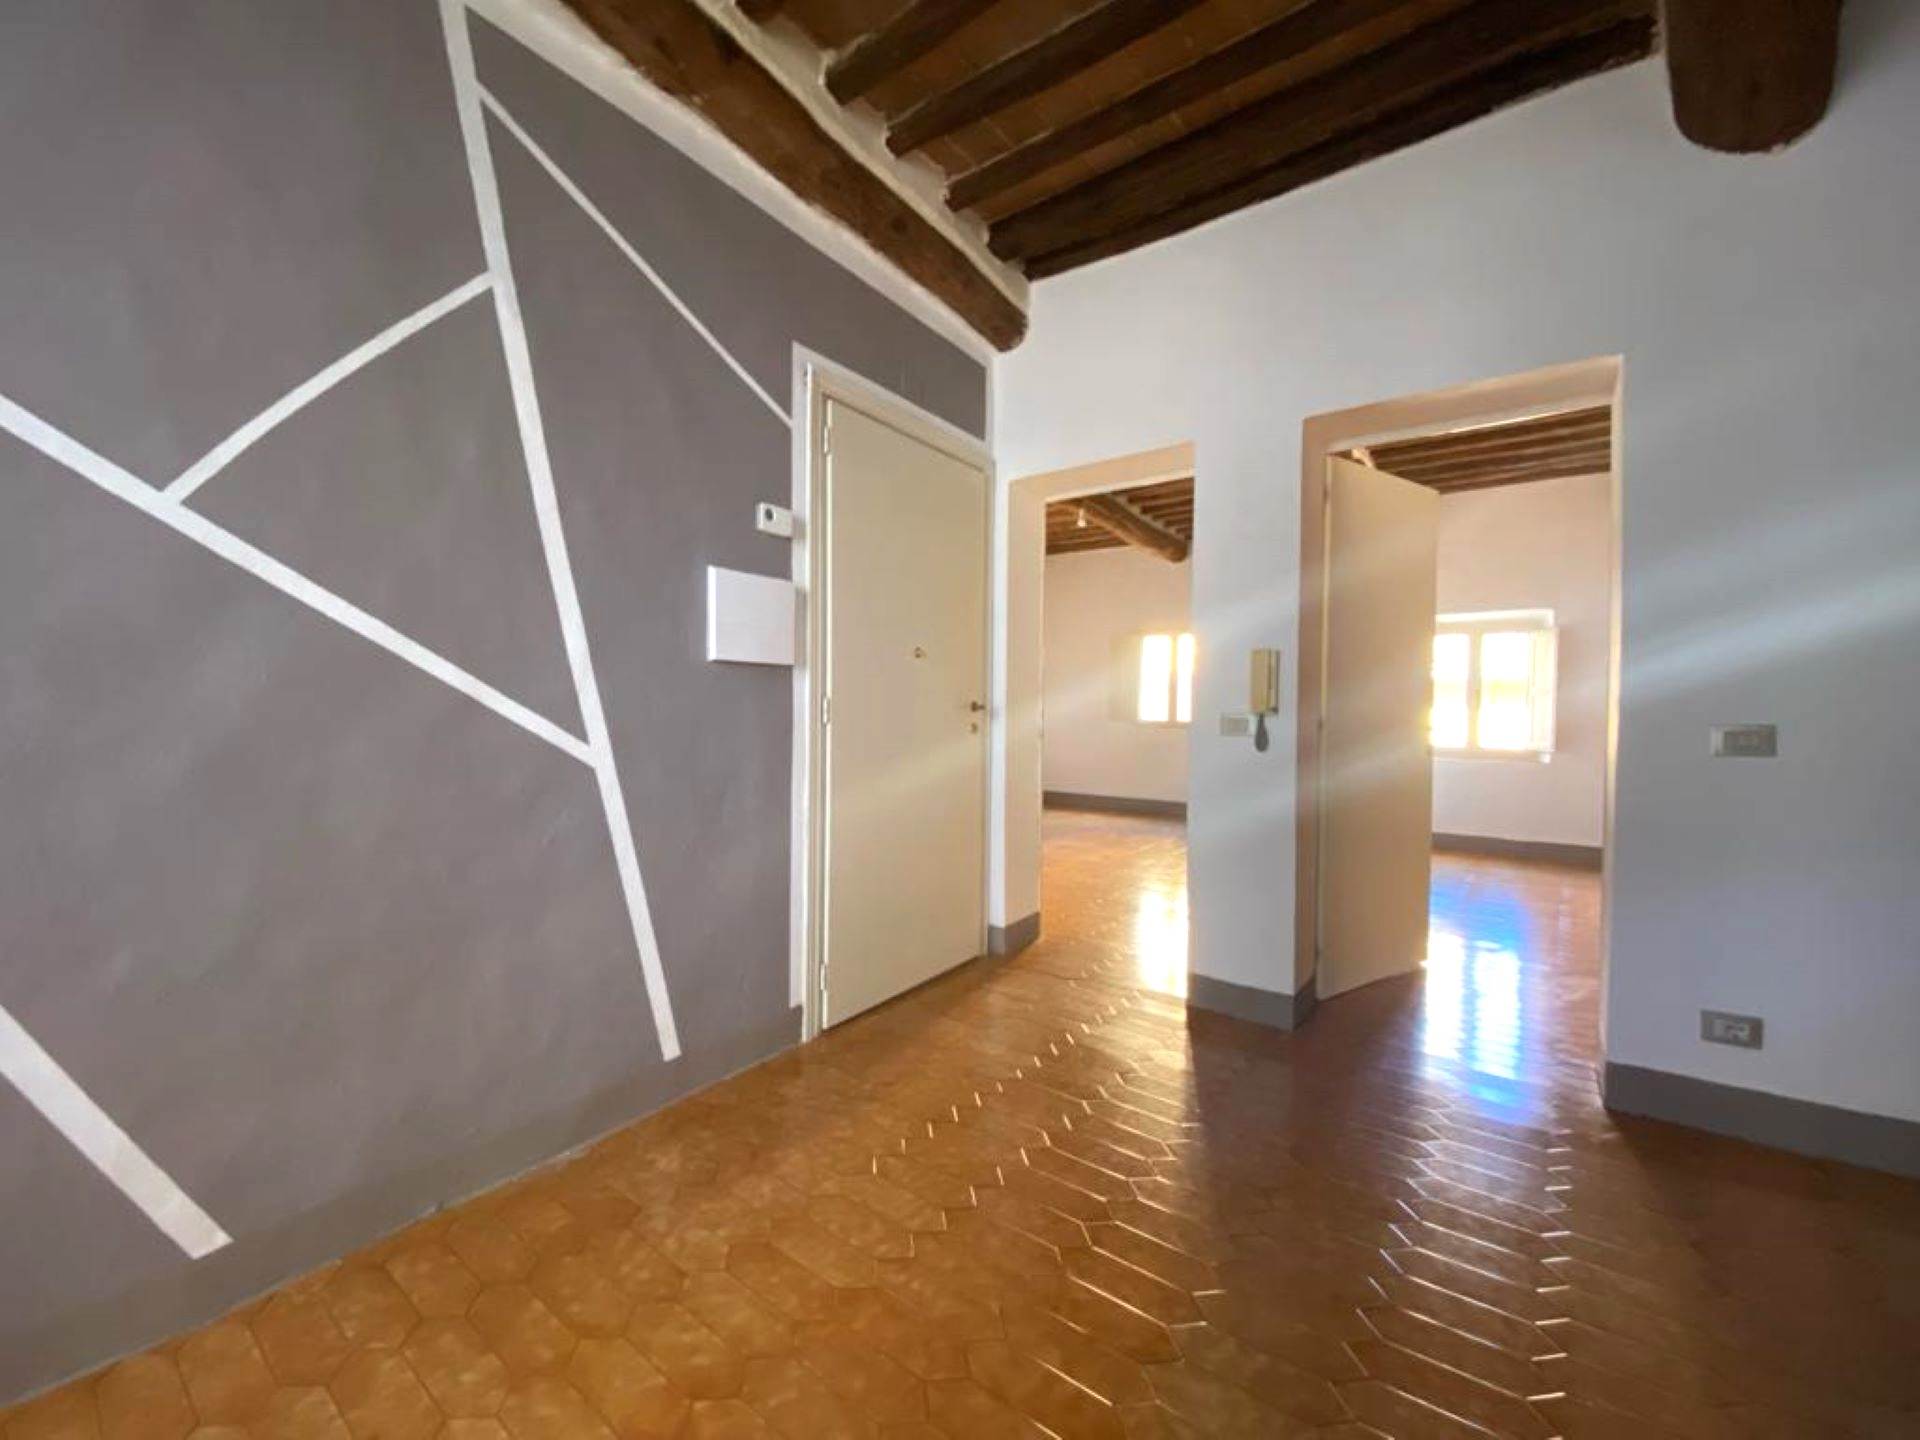 CENTRO - CONTRADA LEOCORNO, SIENA, Apartment for rent of 65 Sq. mt., Good condition, Heating Individual heating system, Energetic class: G, Epi: 217,